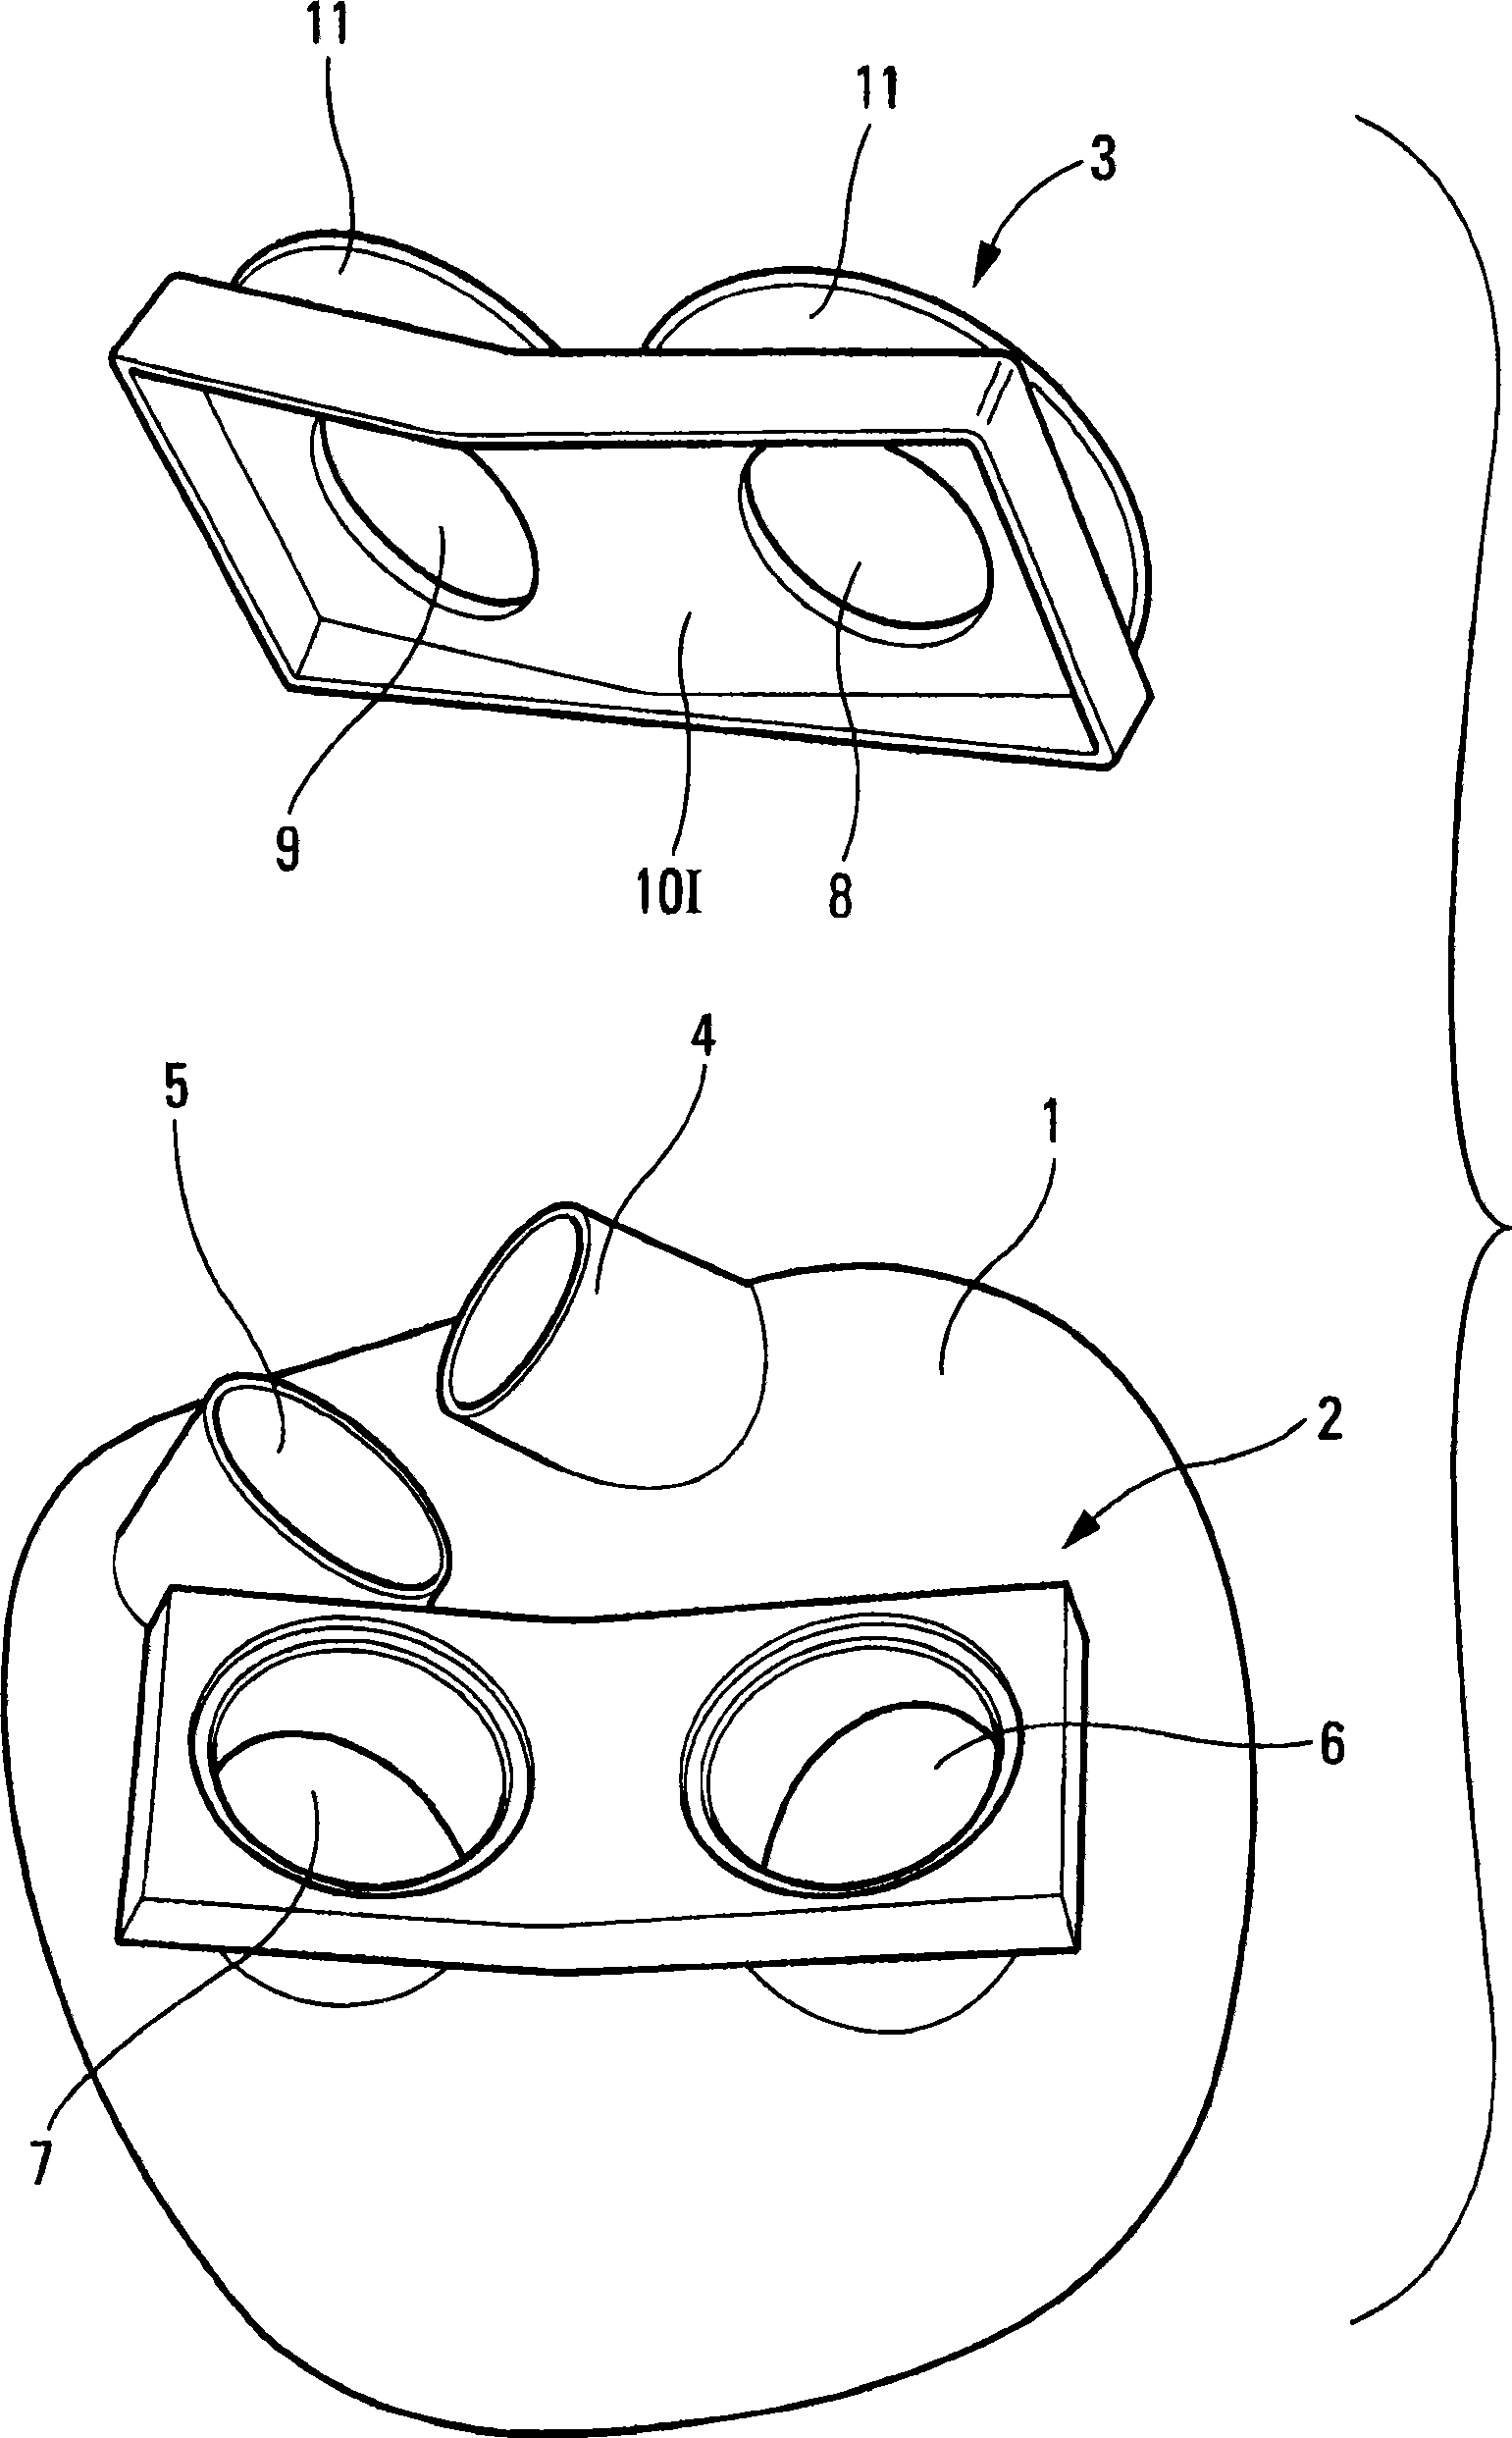 Connection device between an artificial heart and the natural atria